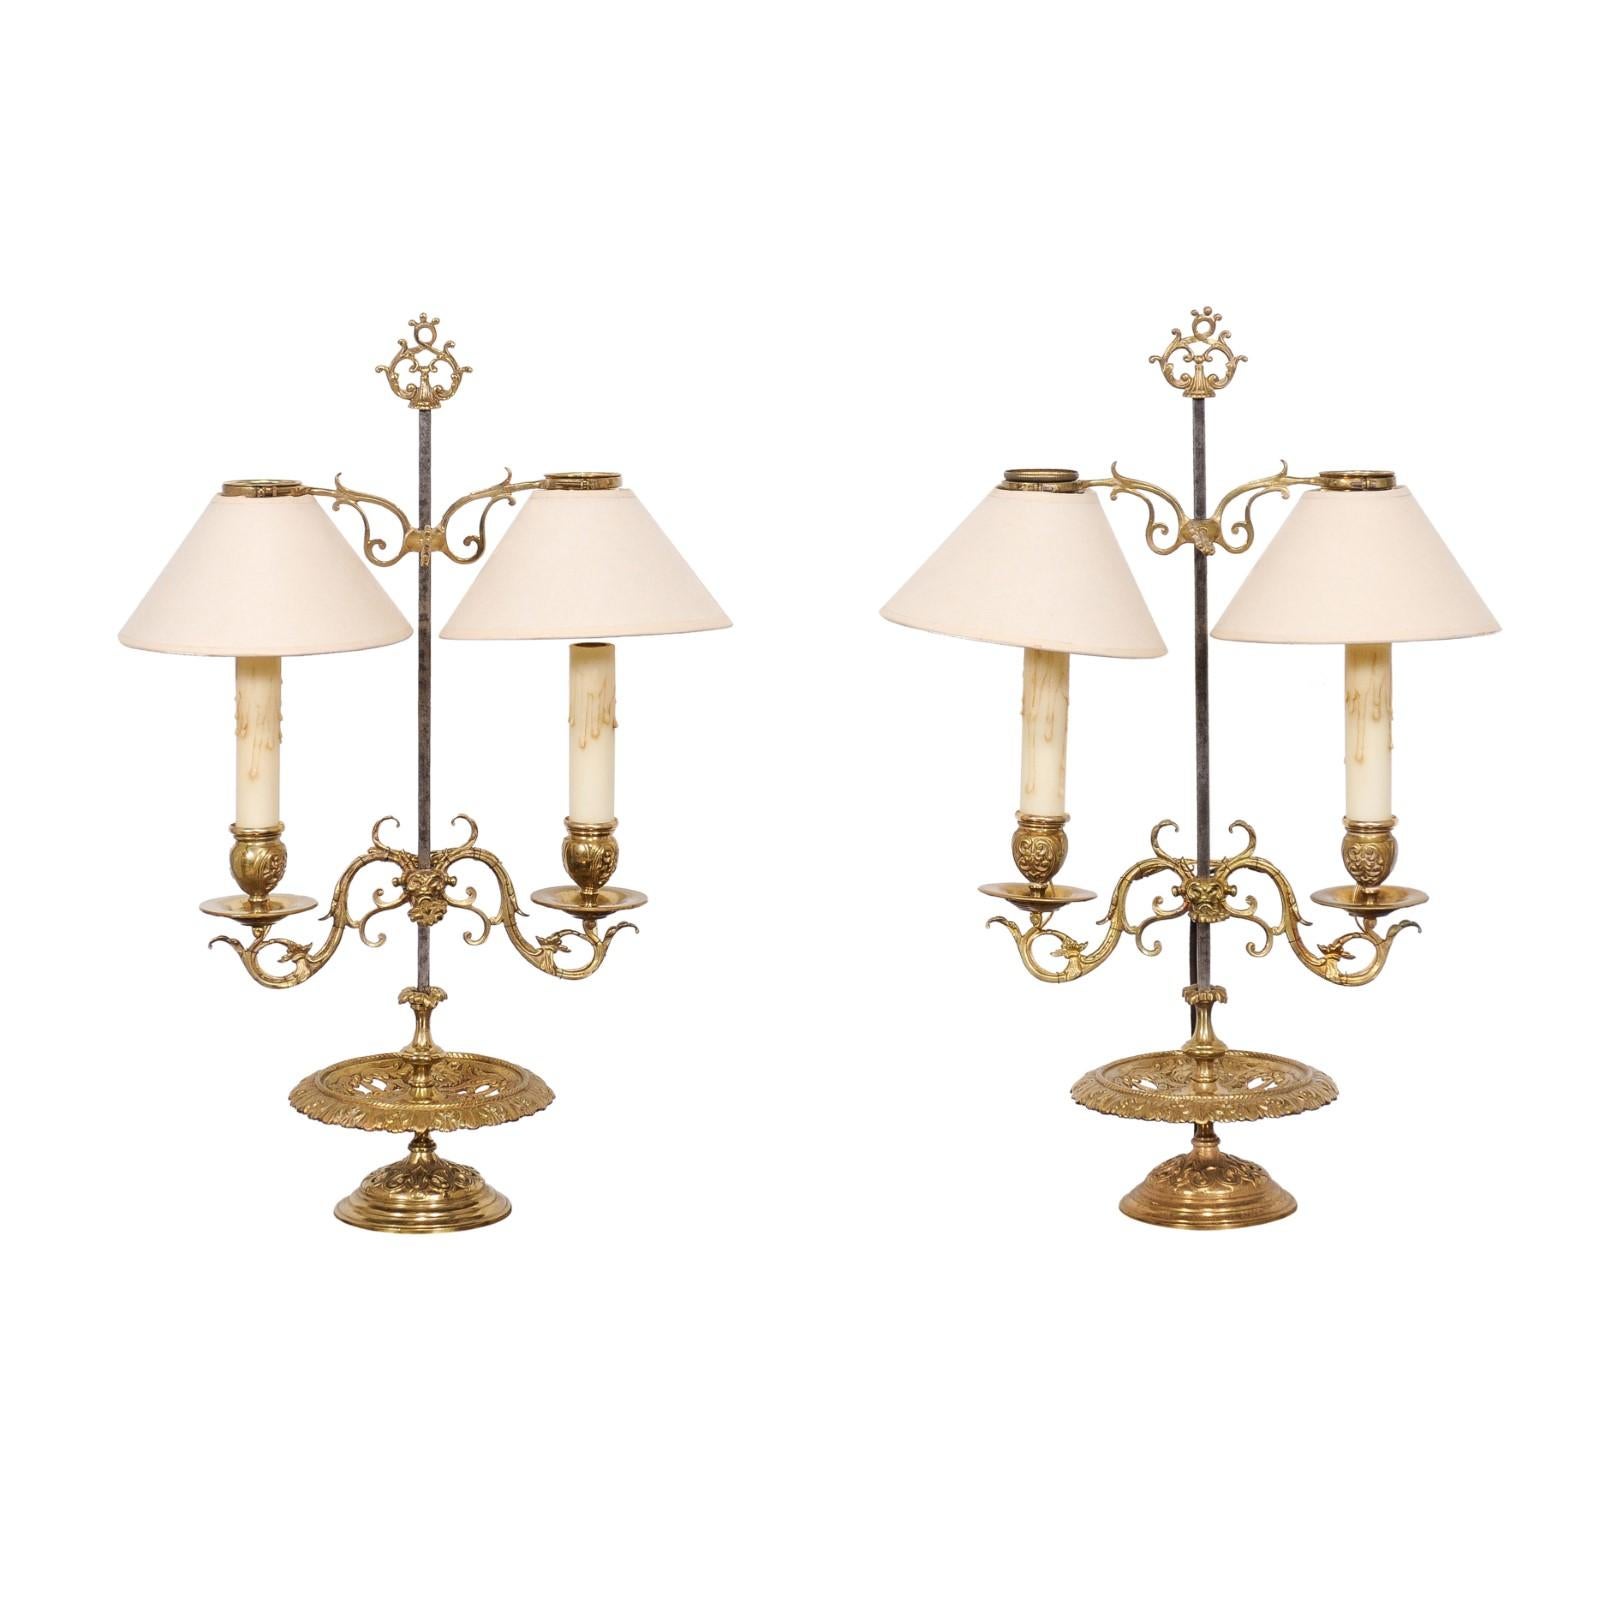 A pair of French brass candlestick table lamps from the 19th century with two scrolling arms each, professionally rewired for the USA. Introduce a touch of French romanticism into your home with these stately 19th-century brass candlestick table